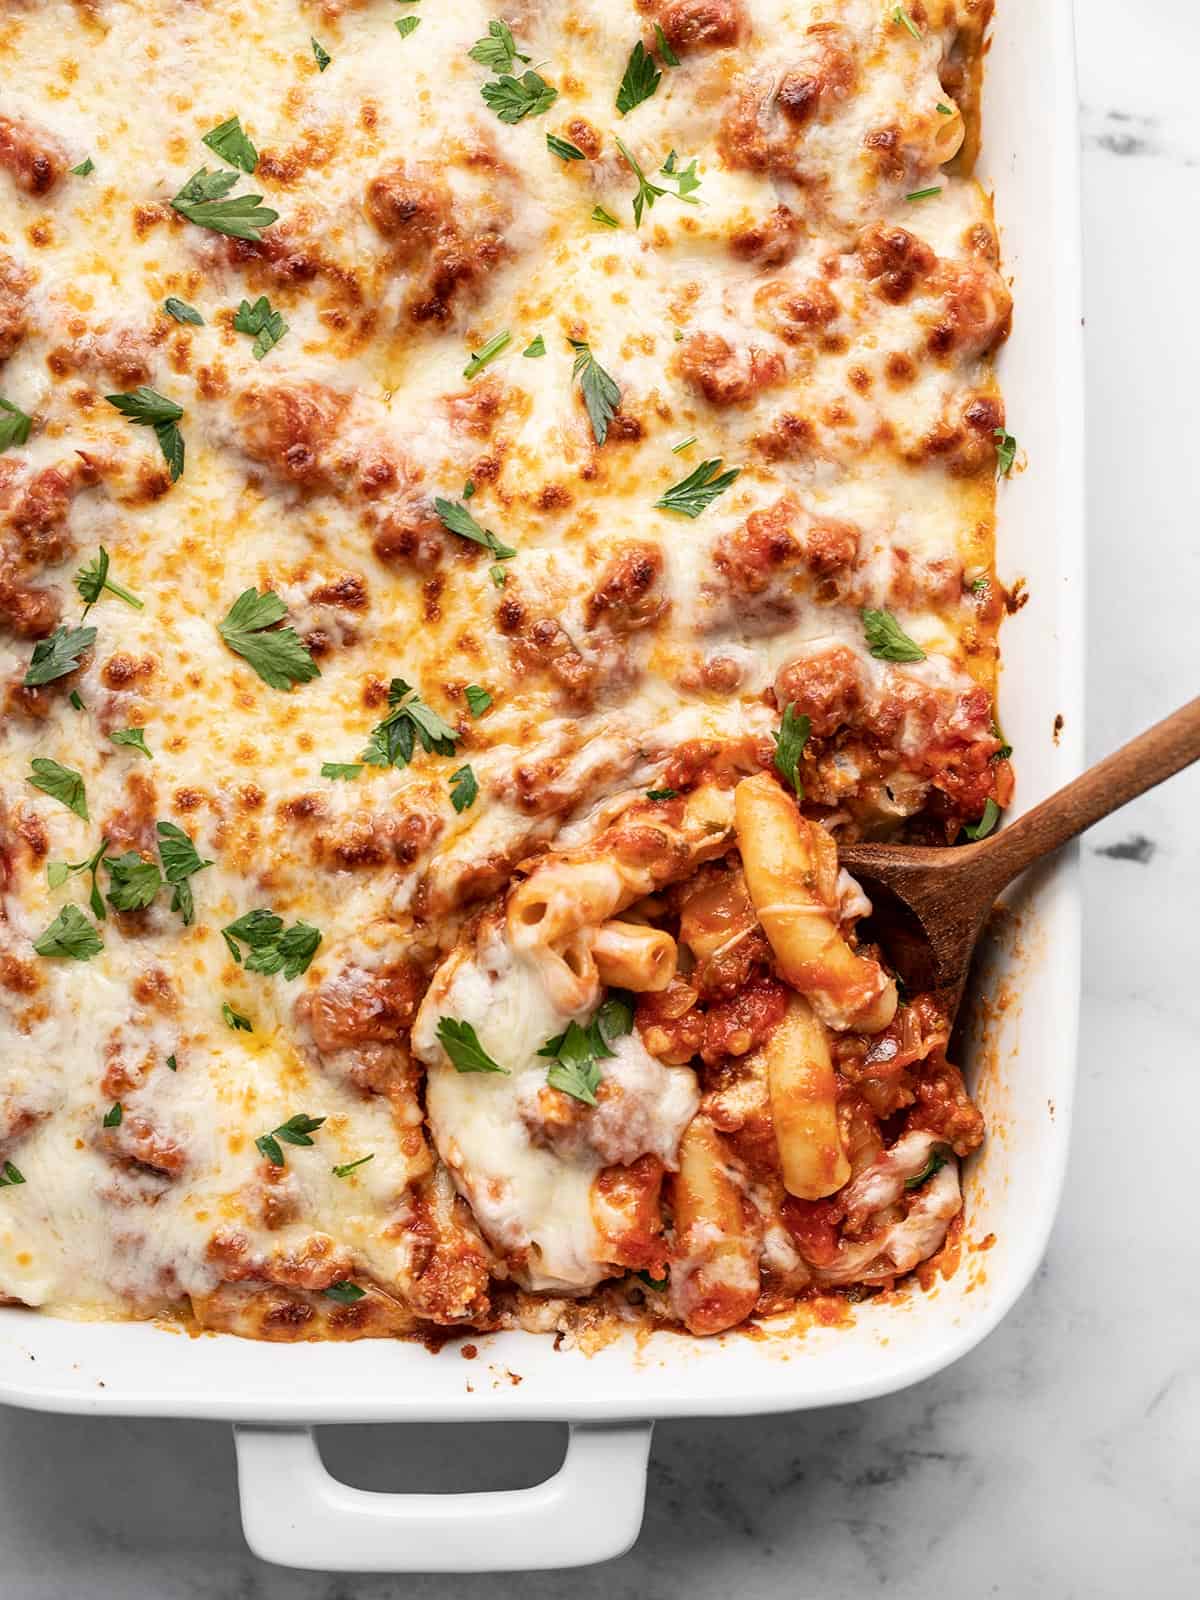 Overhead view of a casserole dish full of baked ziti with the corner being scooped out.